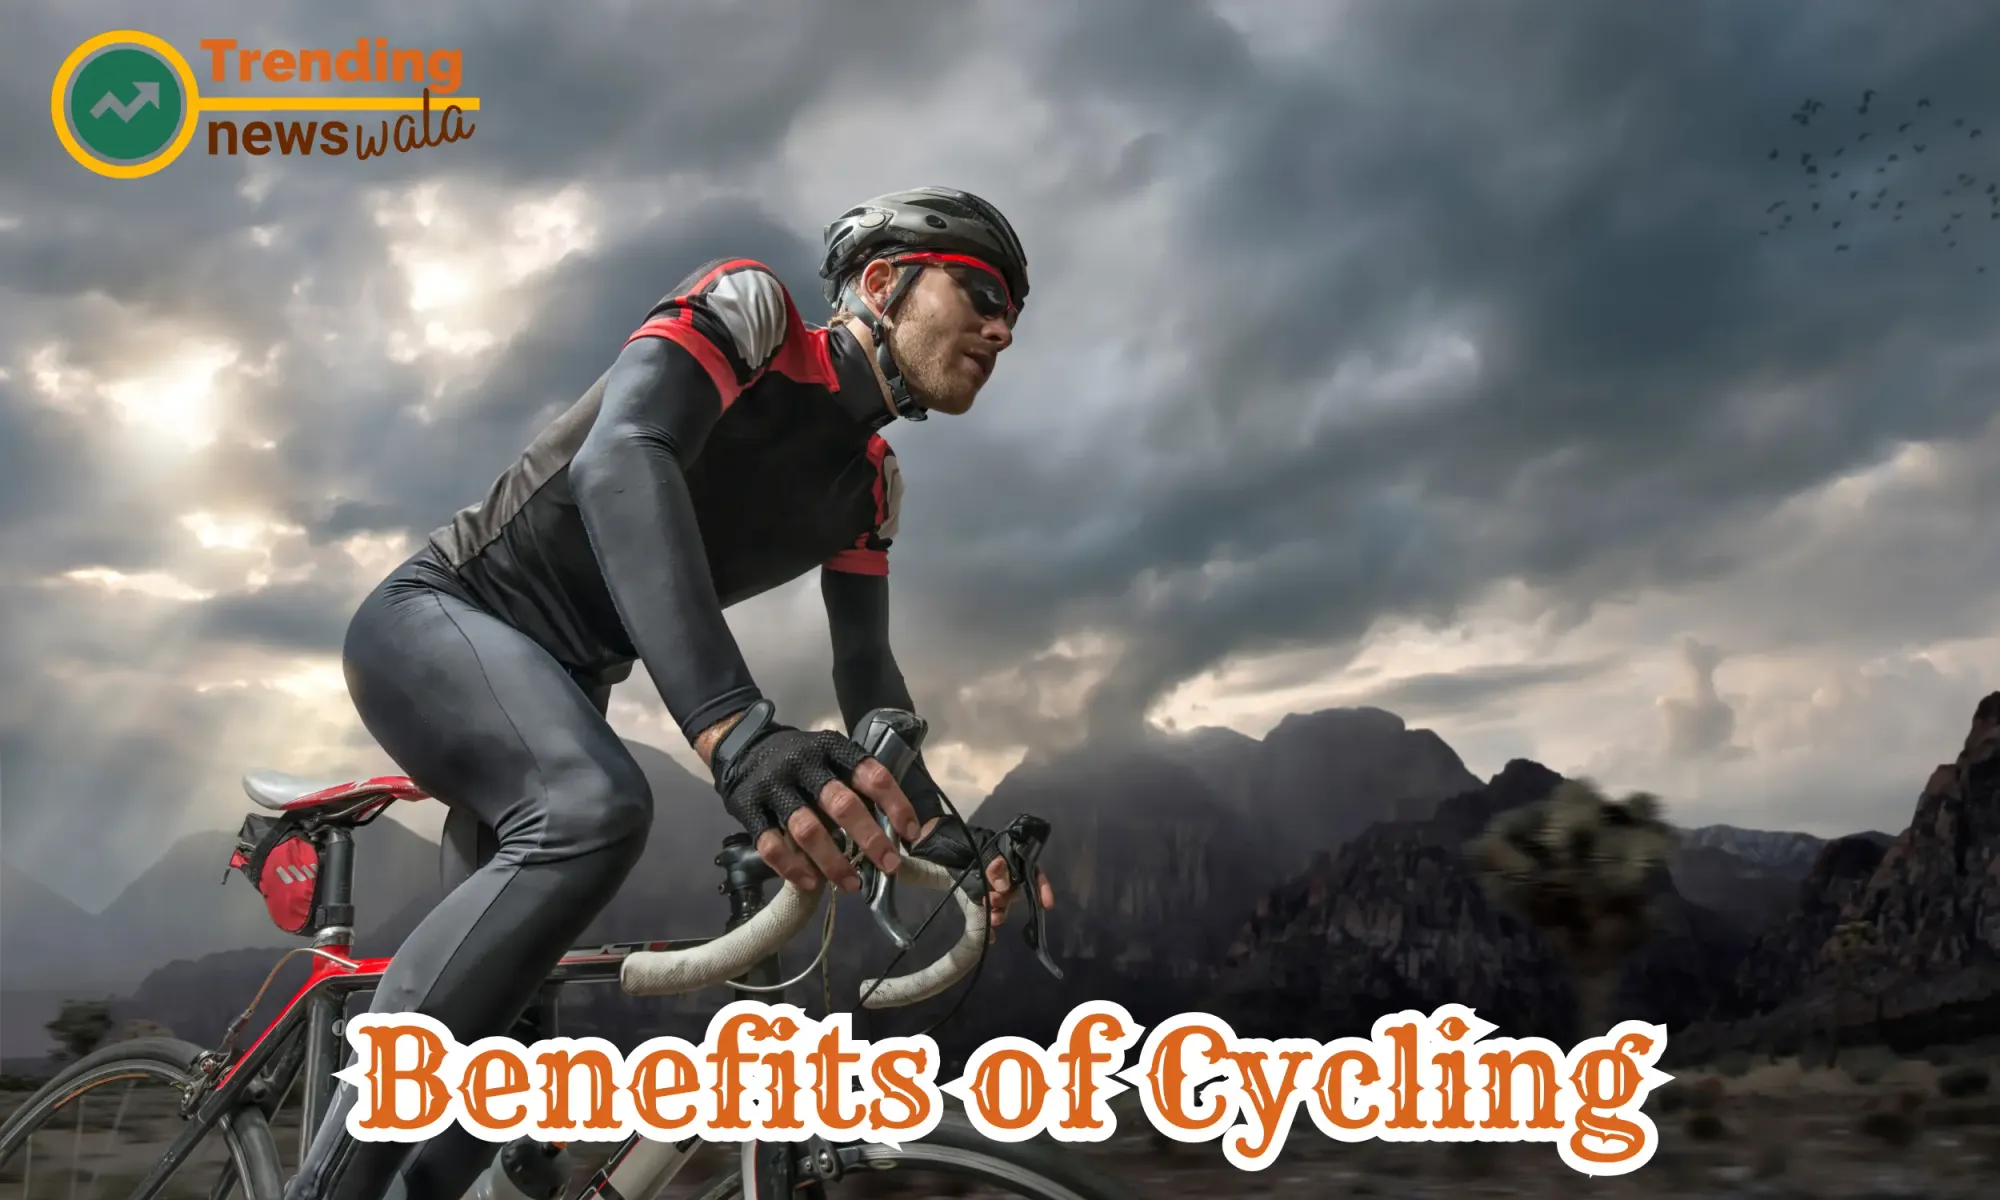 10 Benefits of Cycling